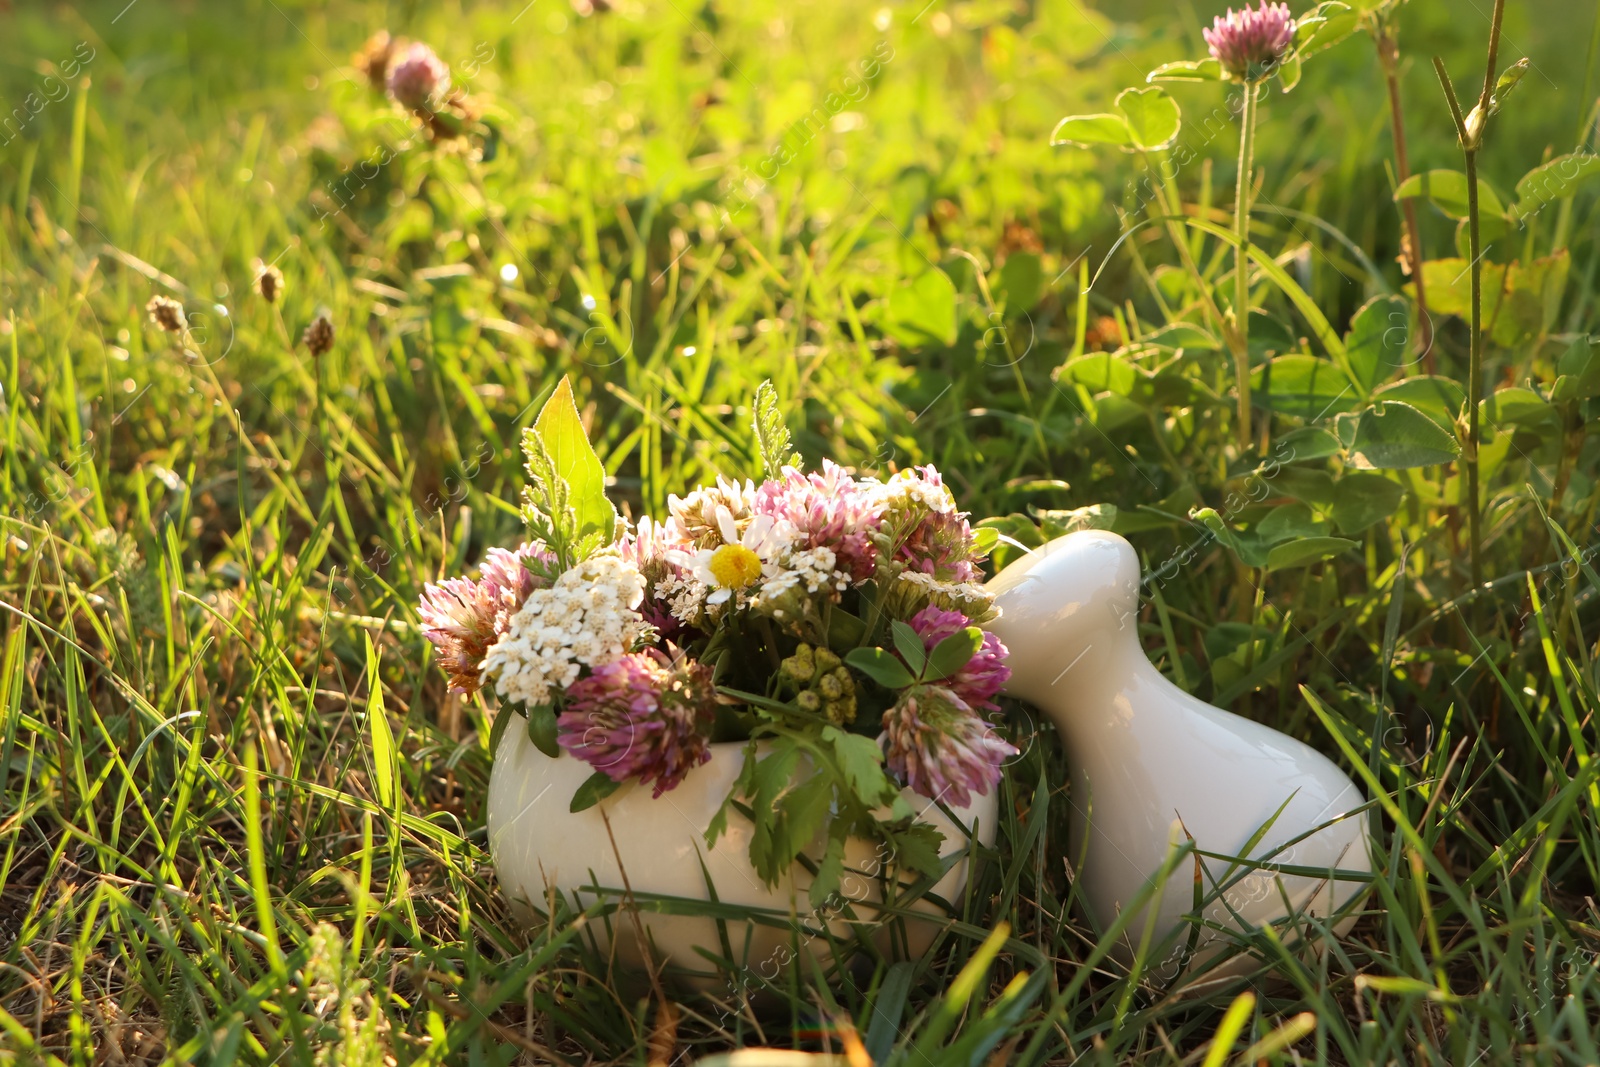 Photo of Ceramic mortar with pestle, different wildflowers and herbs in meadow on sunny day